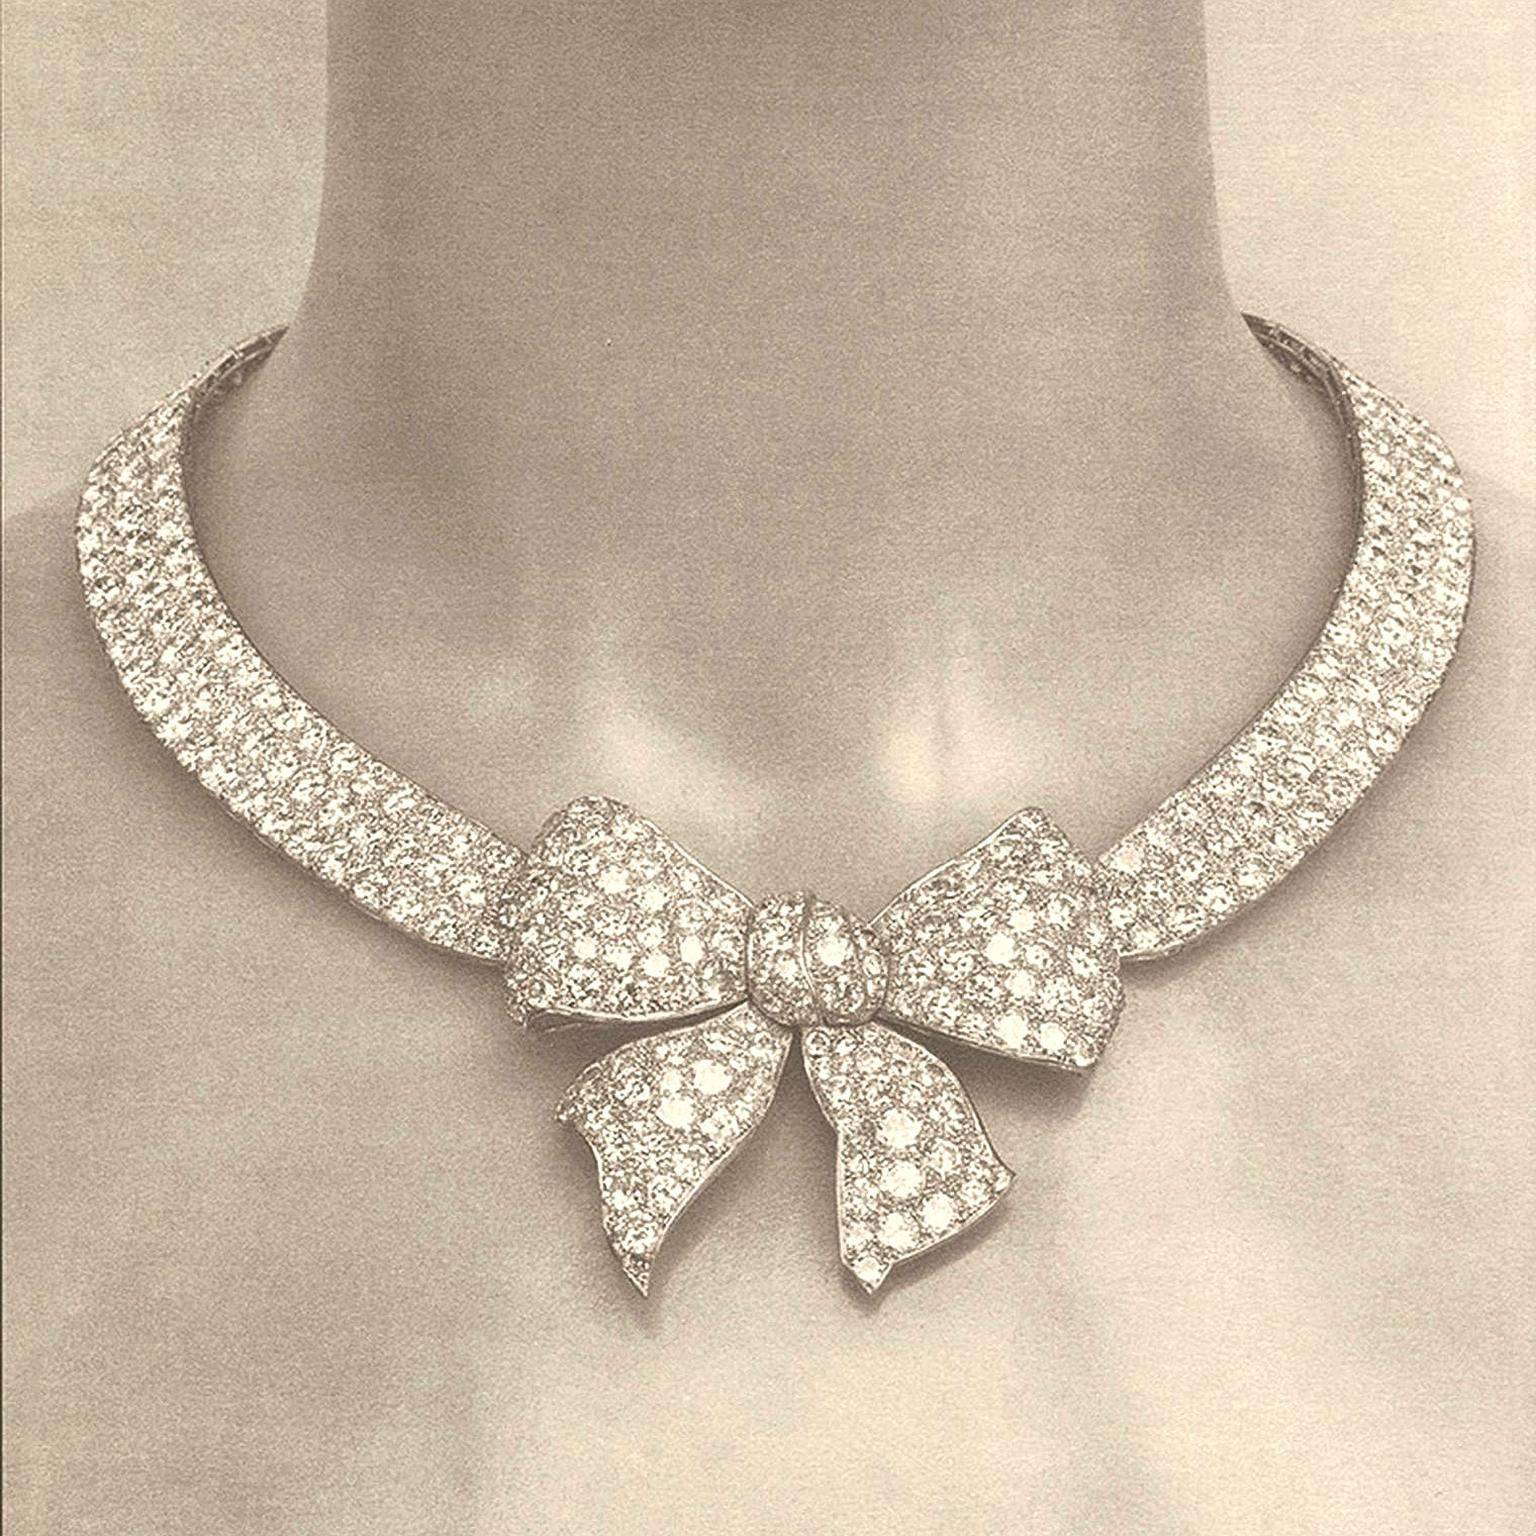 Chanel's 1932 jewels head to the Saatci Gallery London